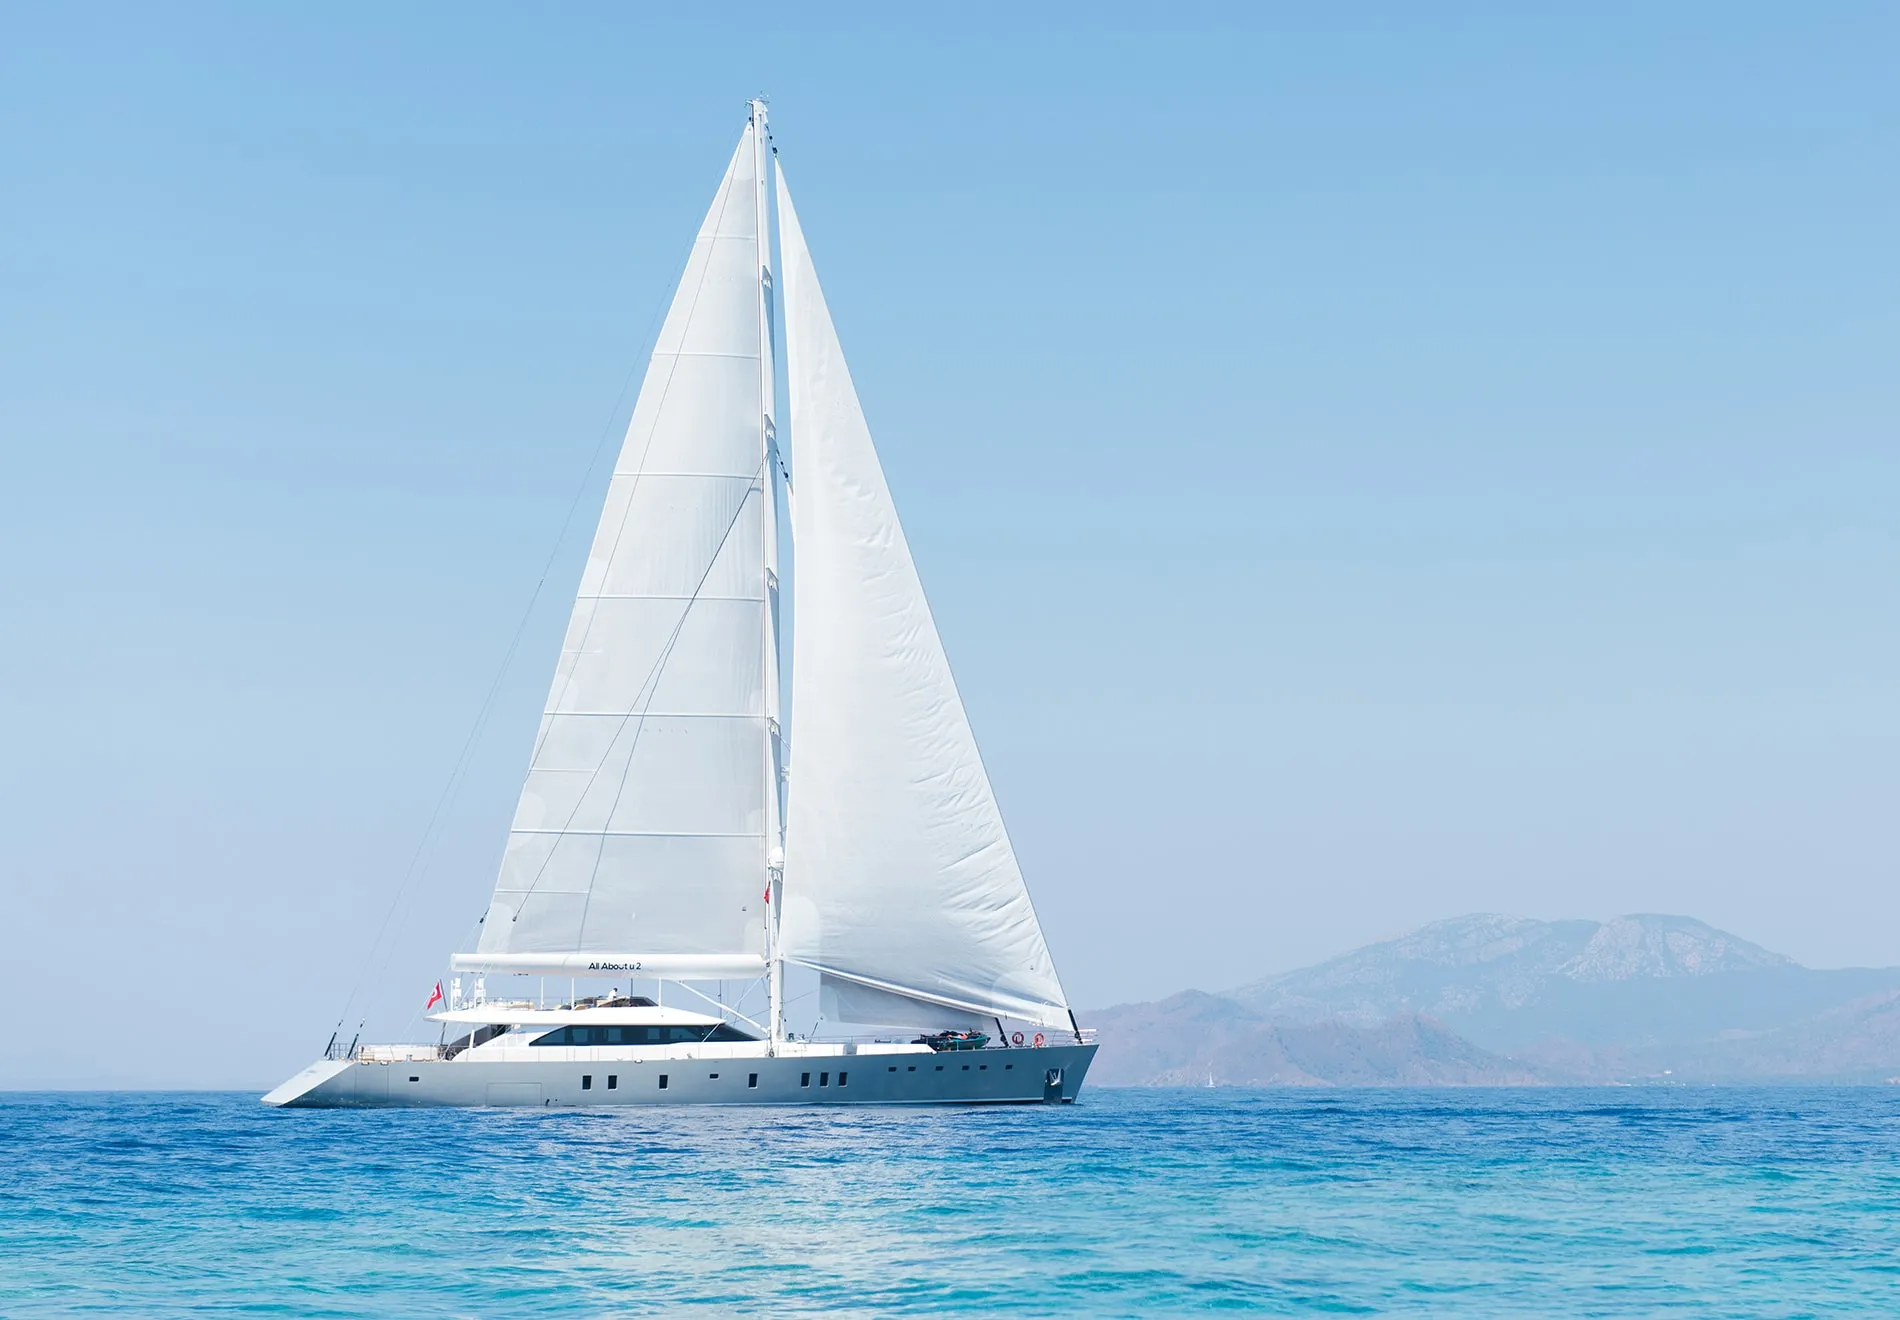 The length of sailing yachts